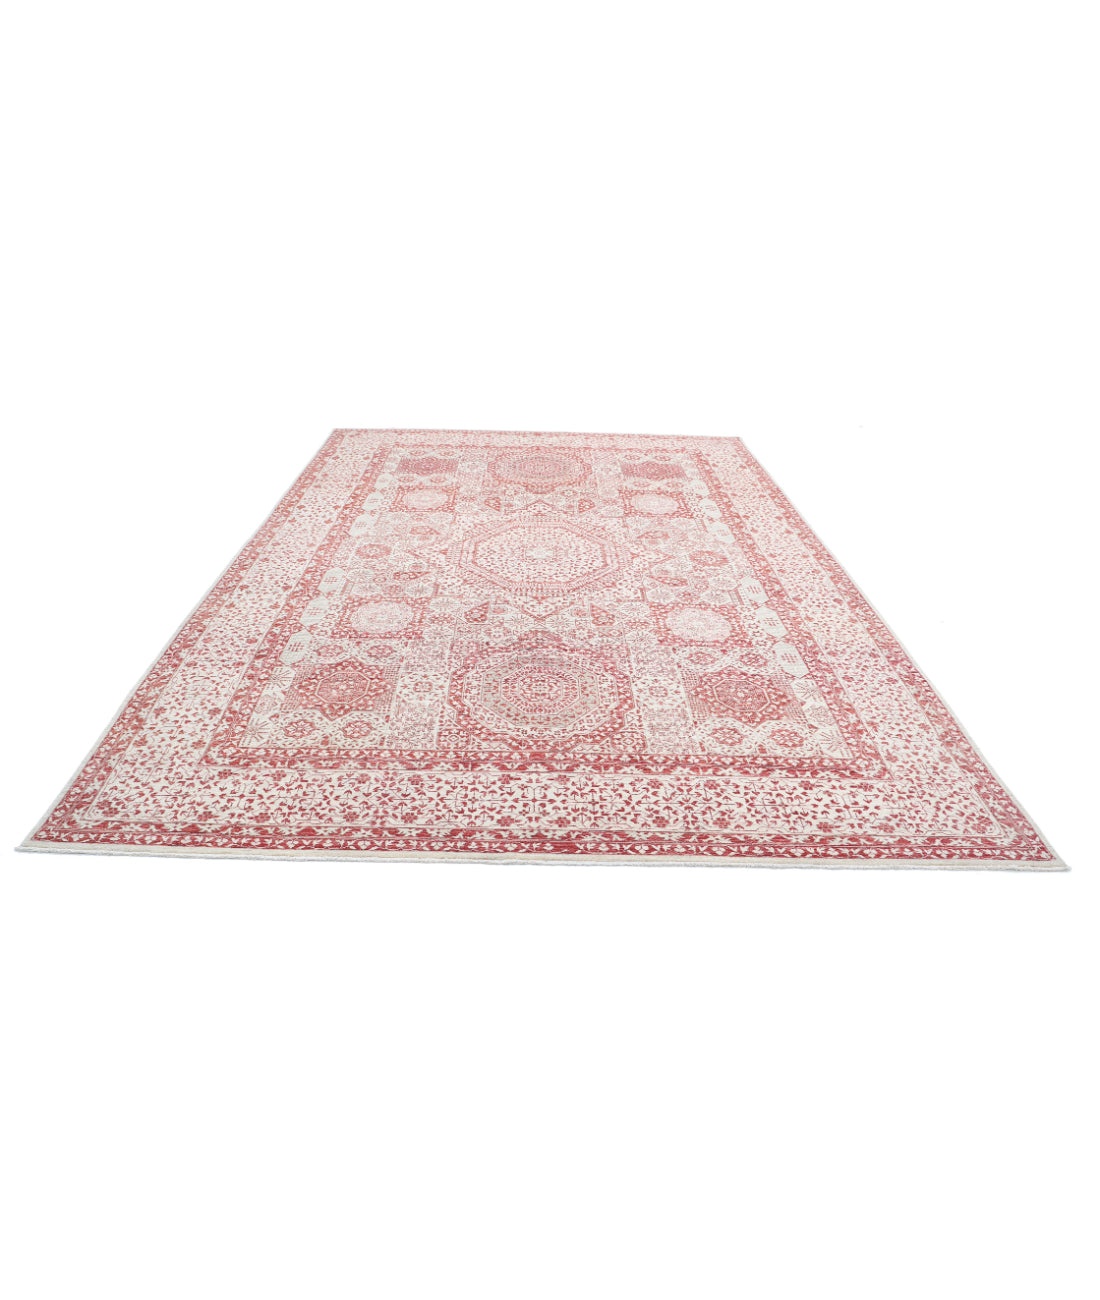 Mamluk 8'11'' X 12'8'' Hand-Knotted Wool Rug 8'11'' x 12'8'' (268 X 380) / Ivory / Red